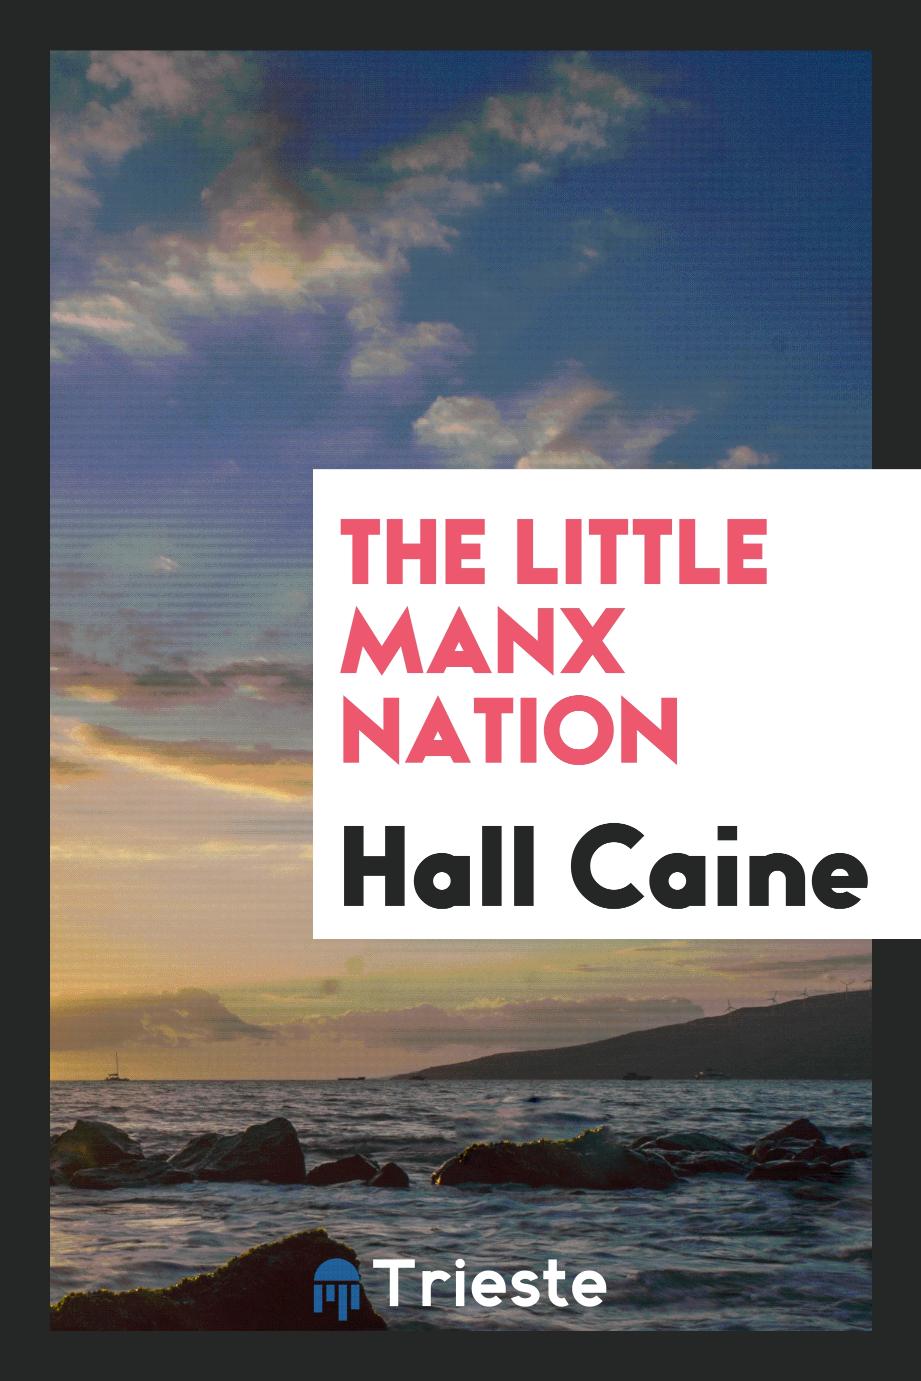 The Little Manx Nation